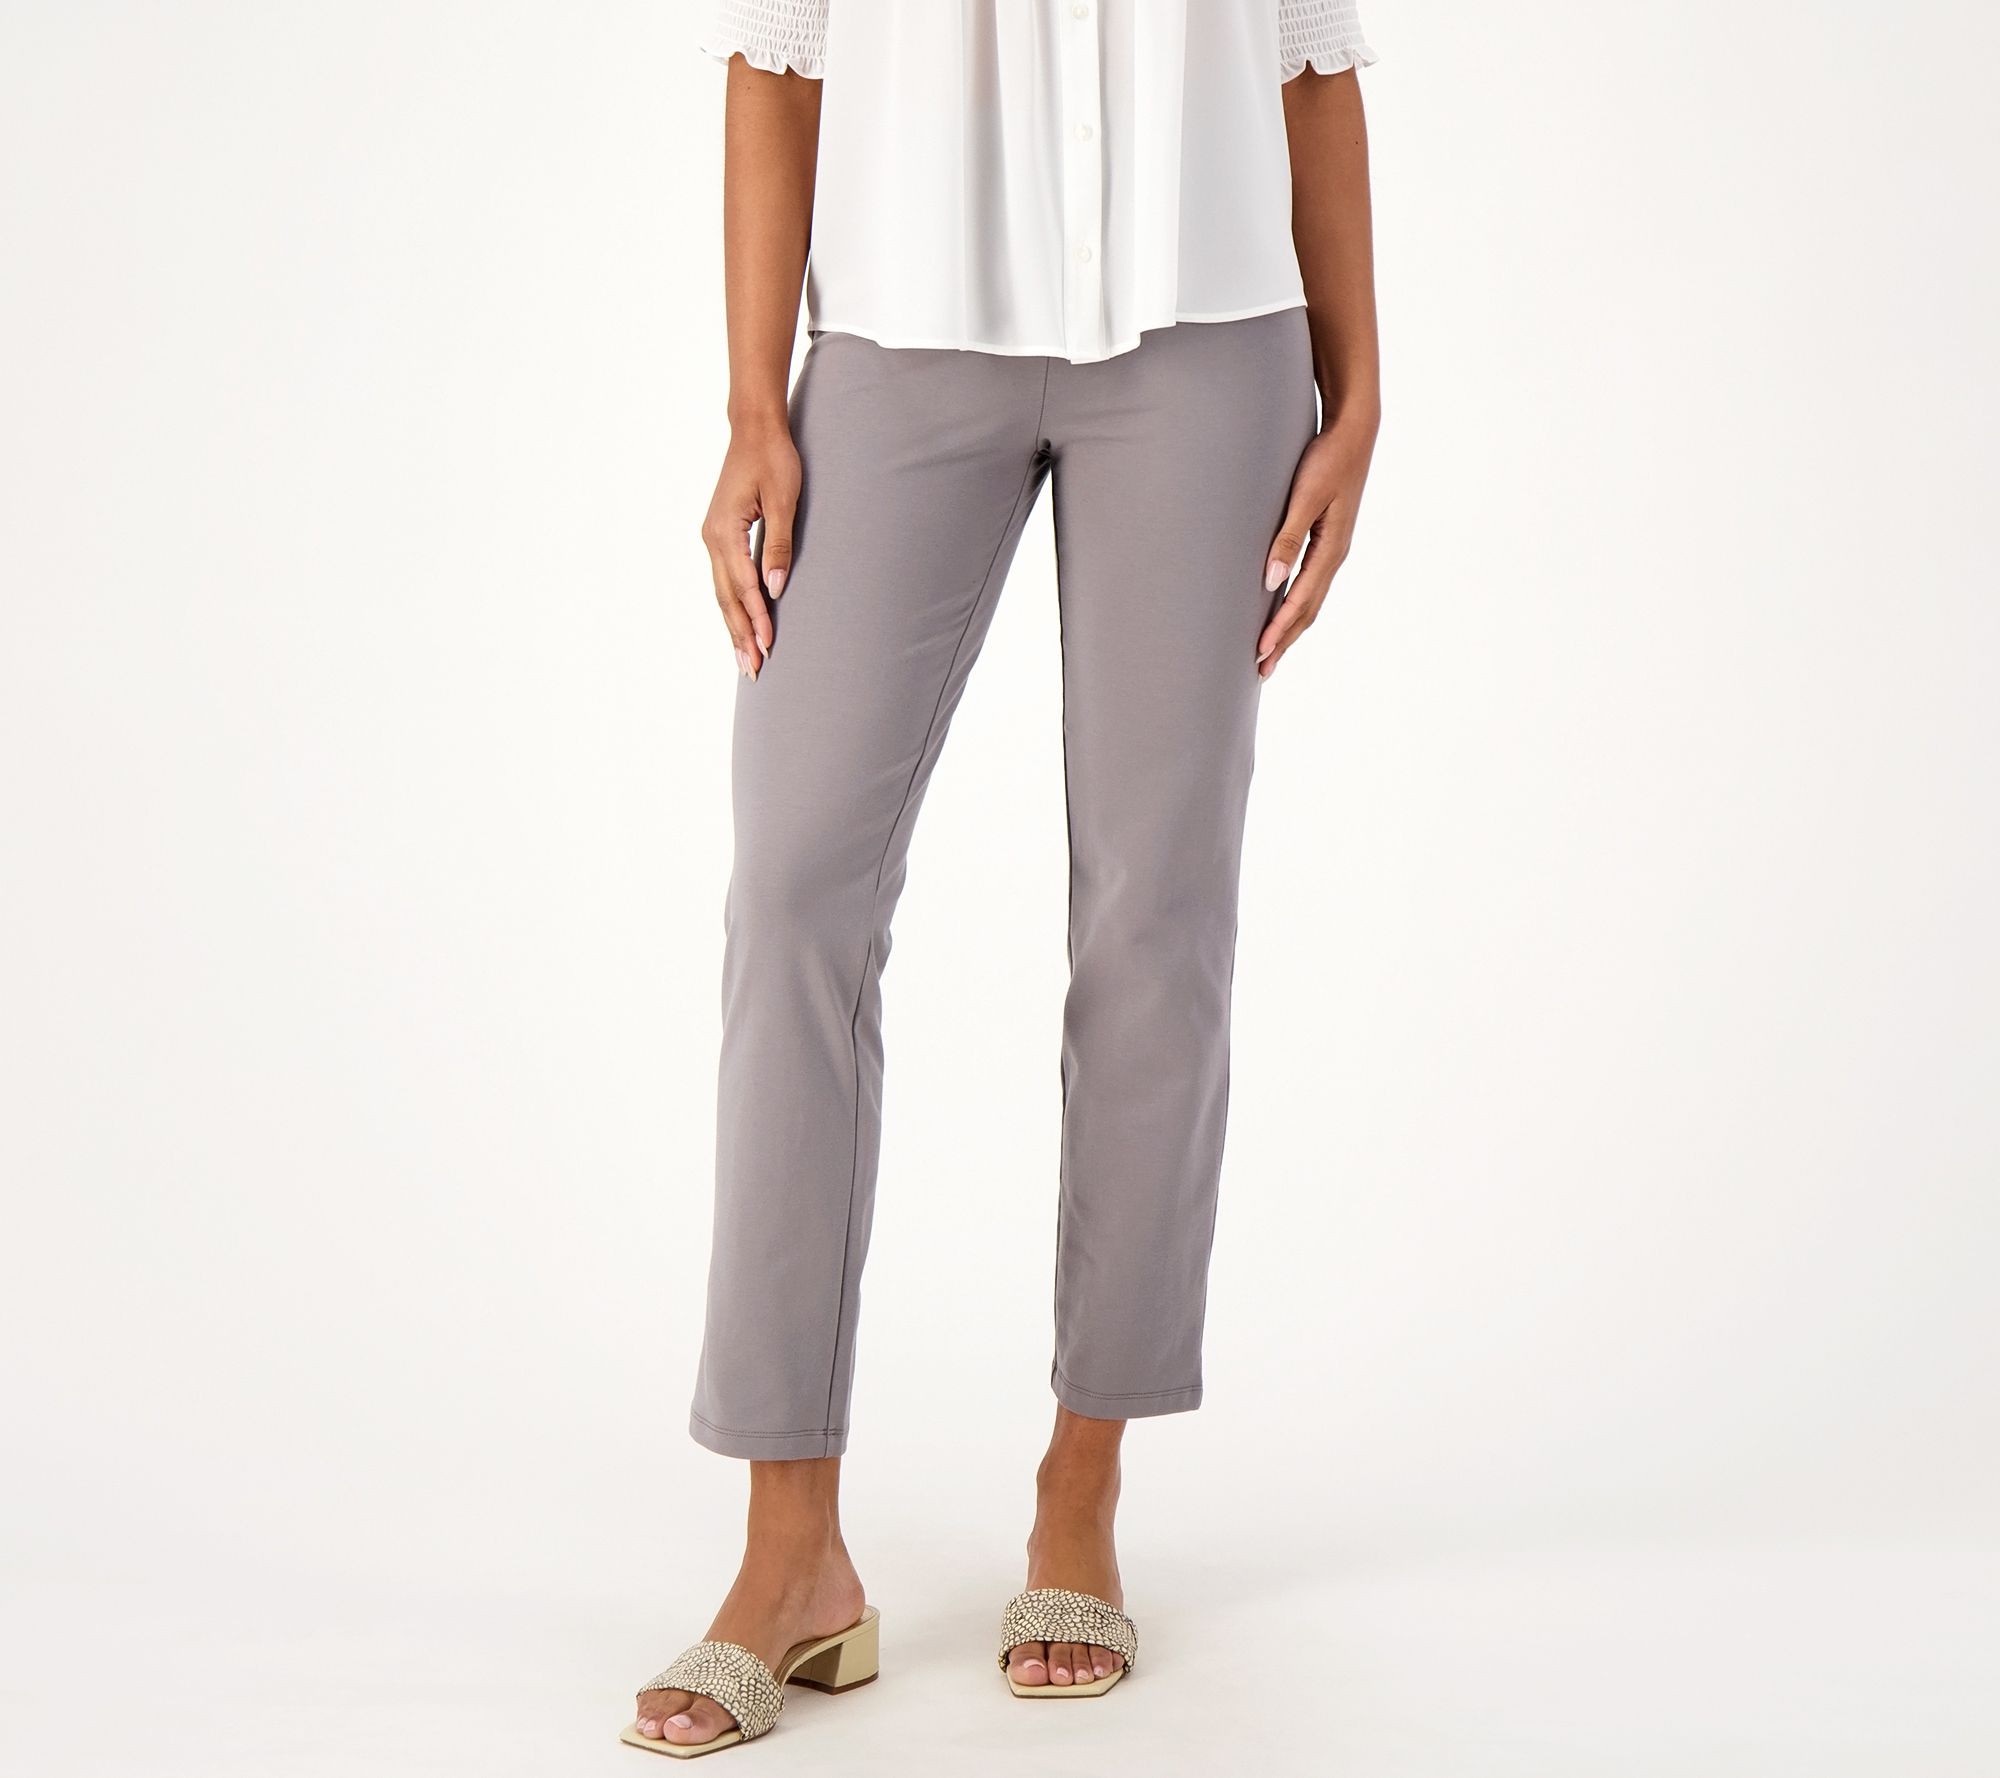 Women's Soft Stretch Pants - All in Motion Heathered Beige XL